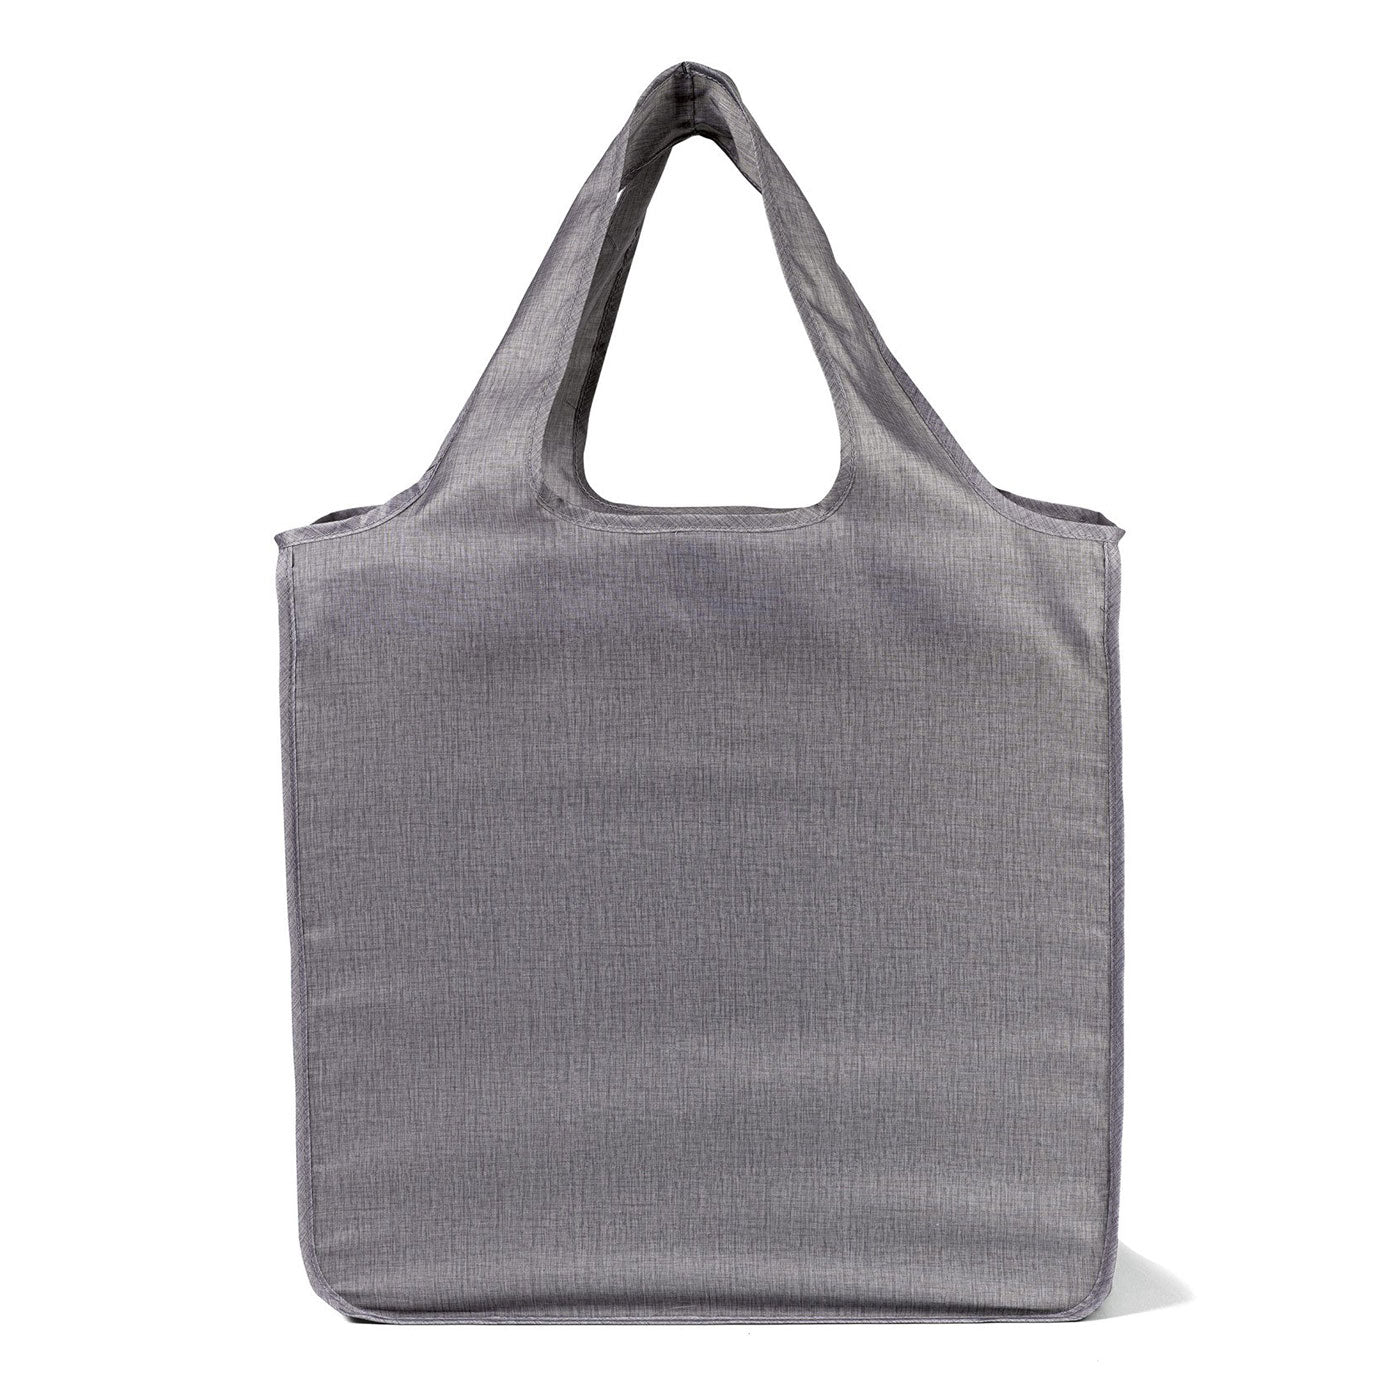 RuMe Classic Large Tote, Heather Grey